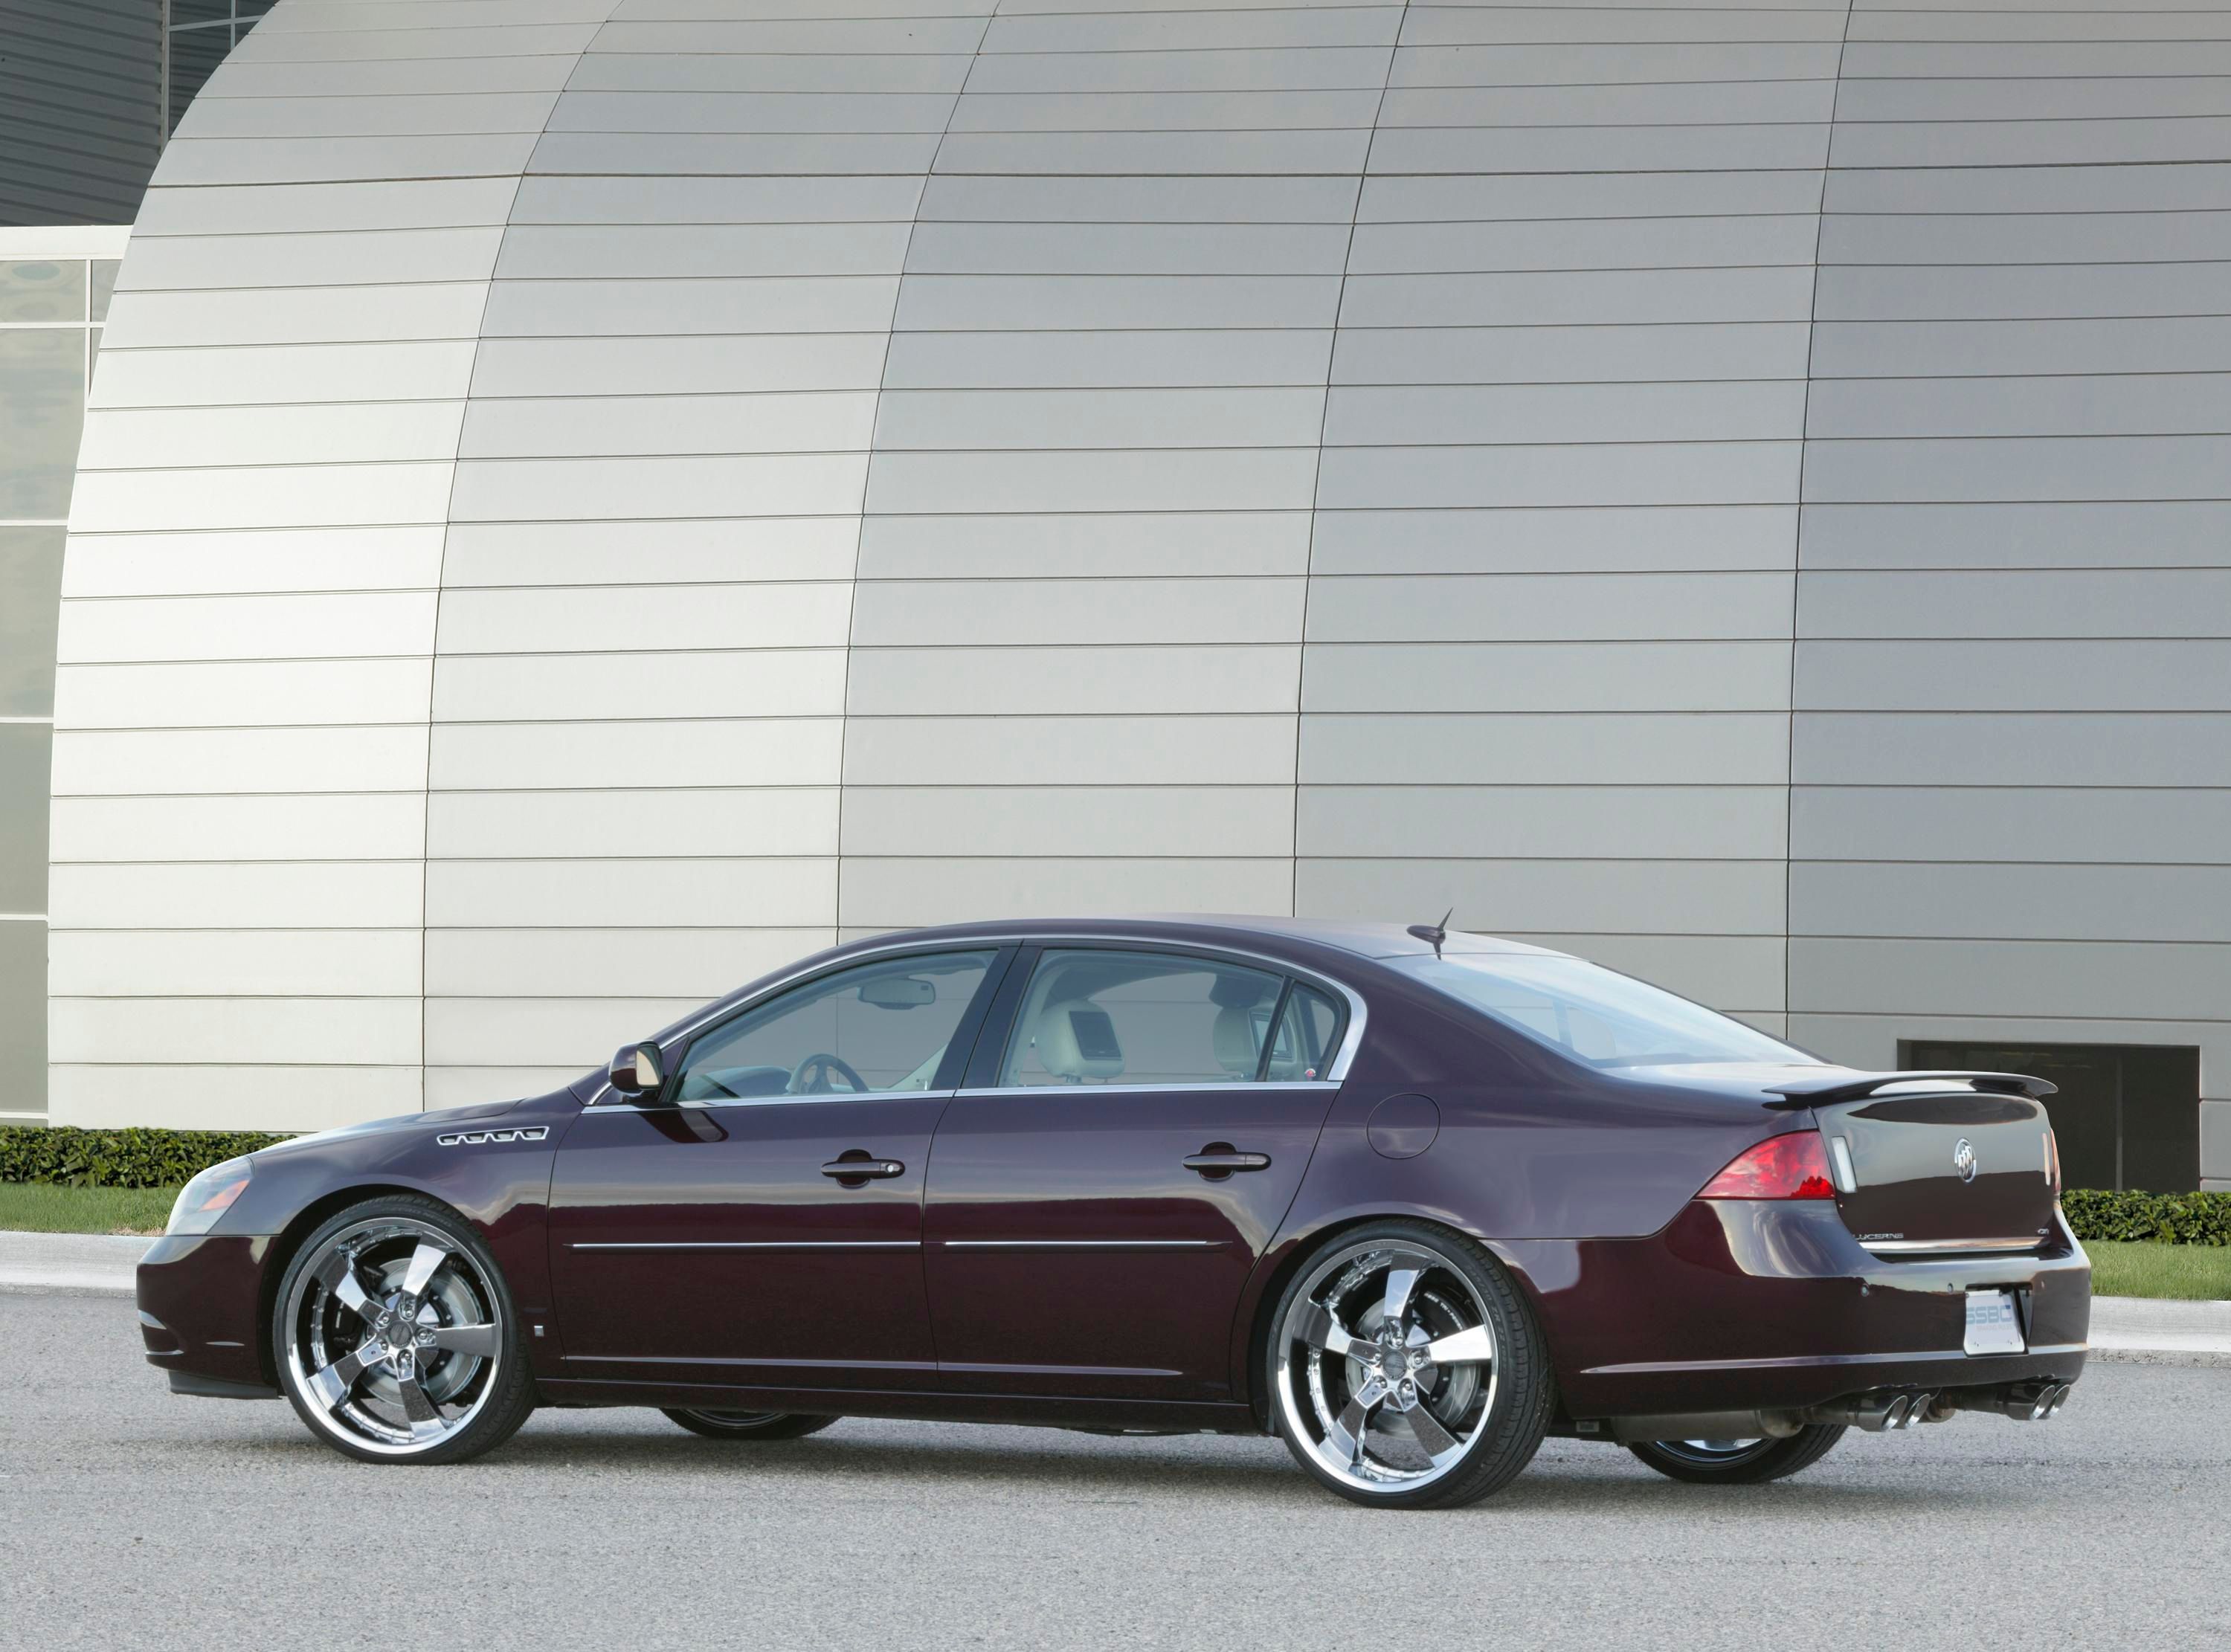 2007 Buick Lucerne CST by Stainless Steel Brakes Corp.